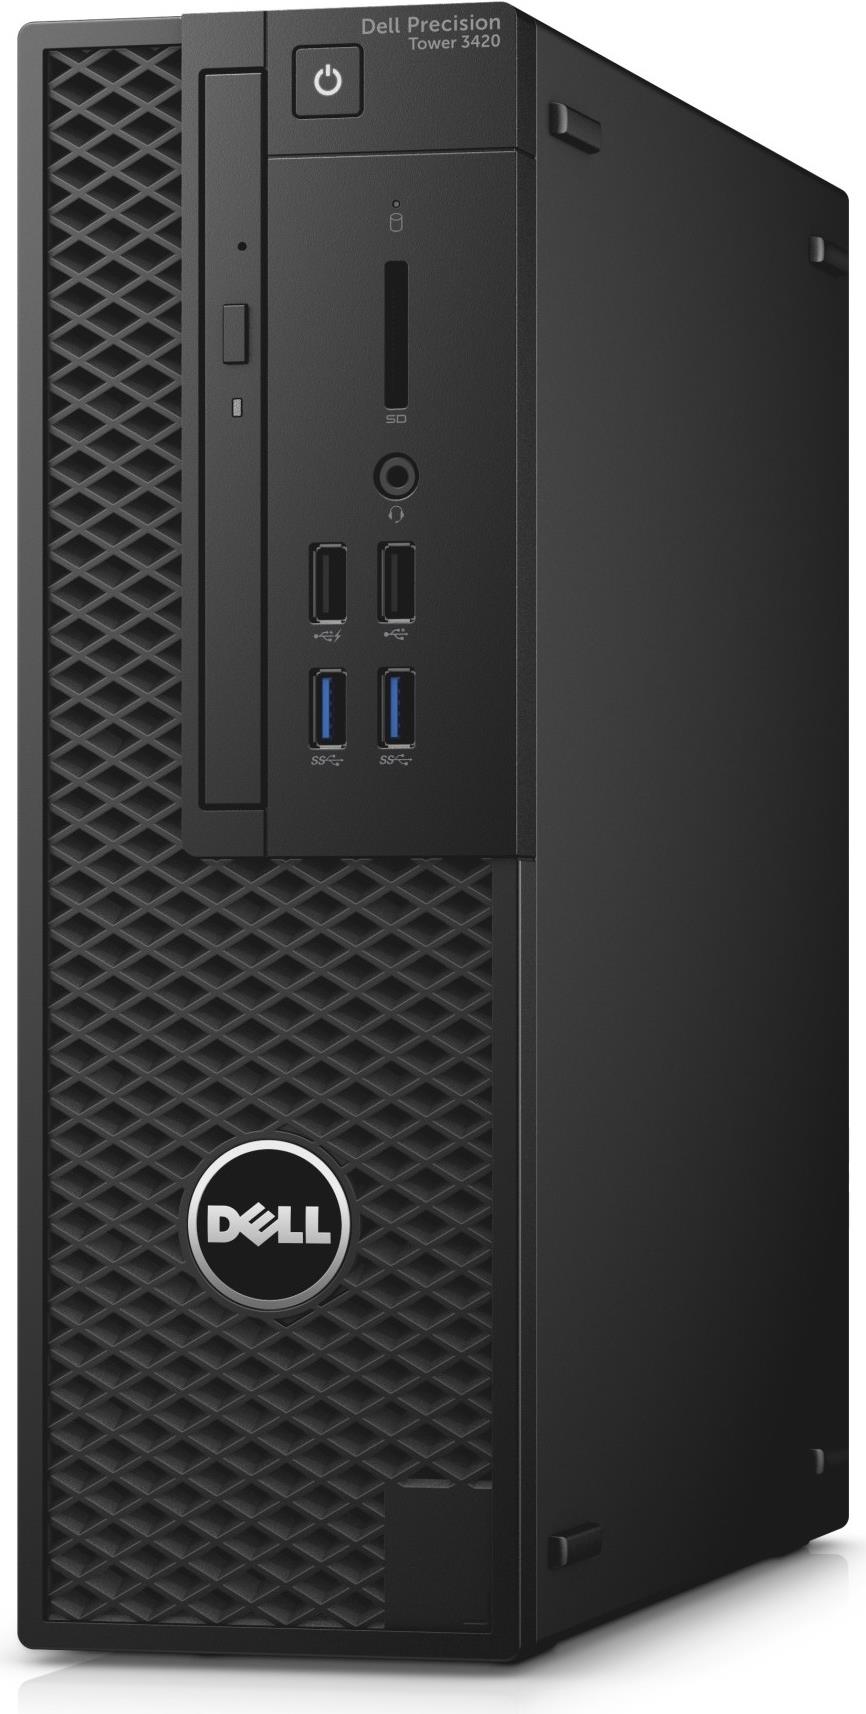 Dell Precision Tower 3420 - SFF - 1 x Core i7 7700 / 3.6 GHz - RAM 8 GB - HDD 1 TB - DVD-Writer - HD Graphics 630 - GigE - Win 10 Pro 64-Bit - vPro - Monitor: keiner - BTP